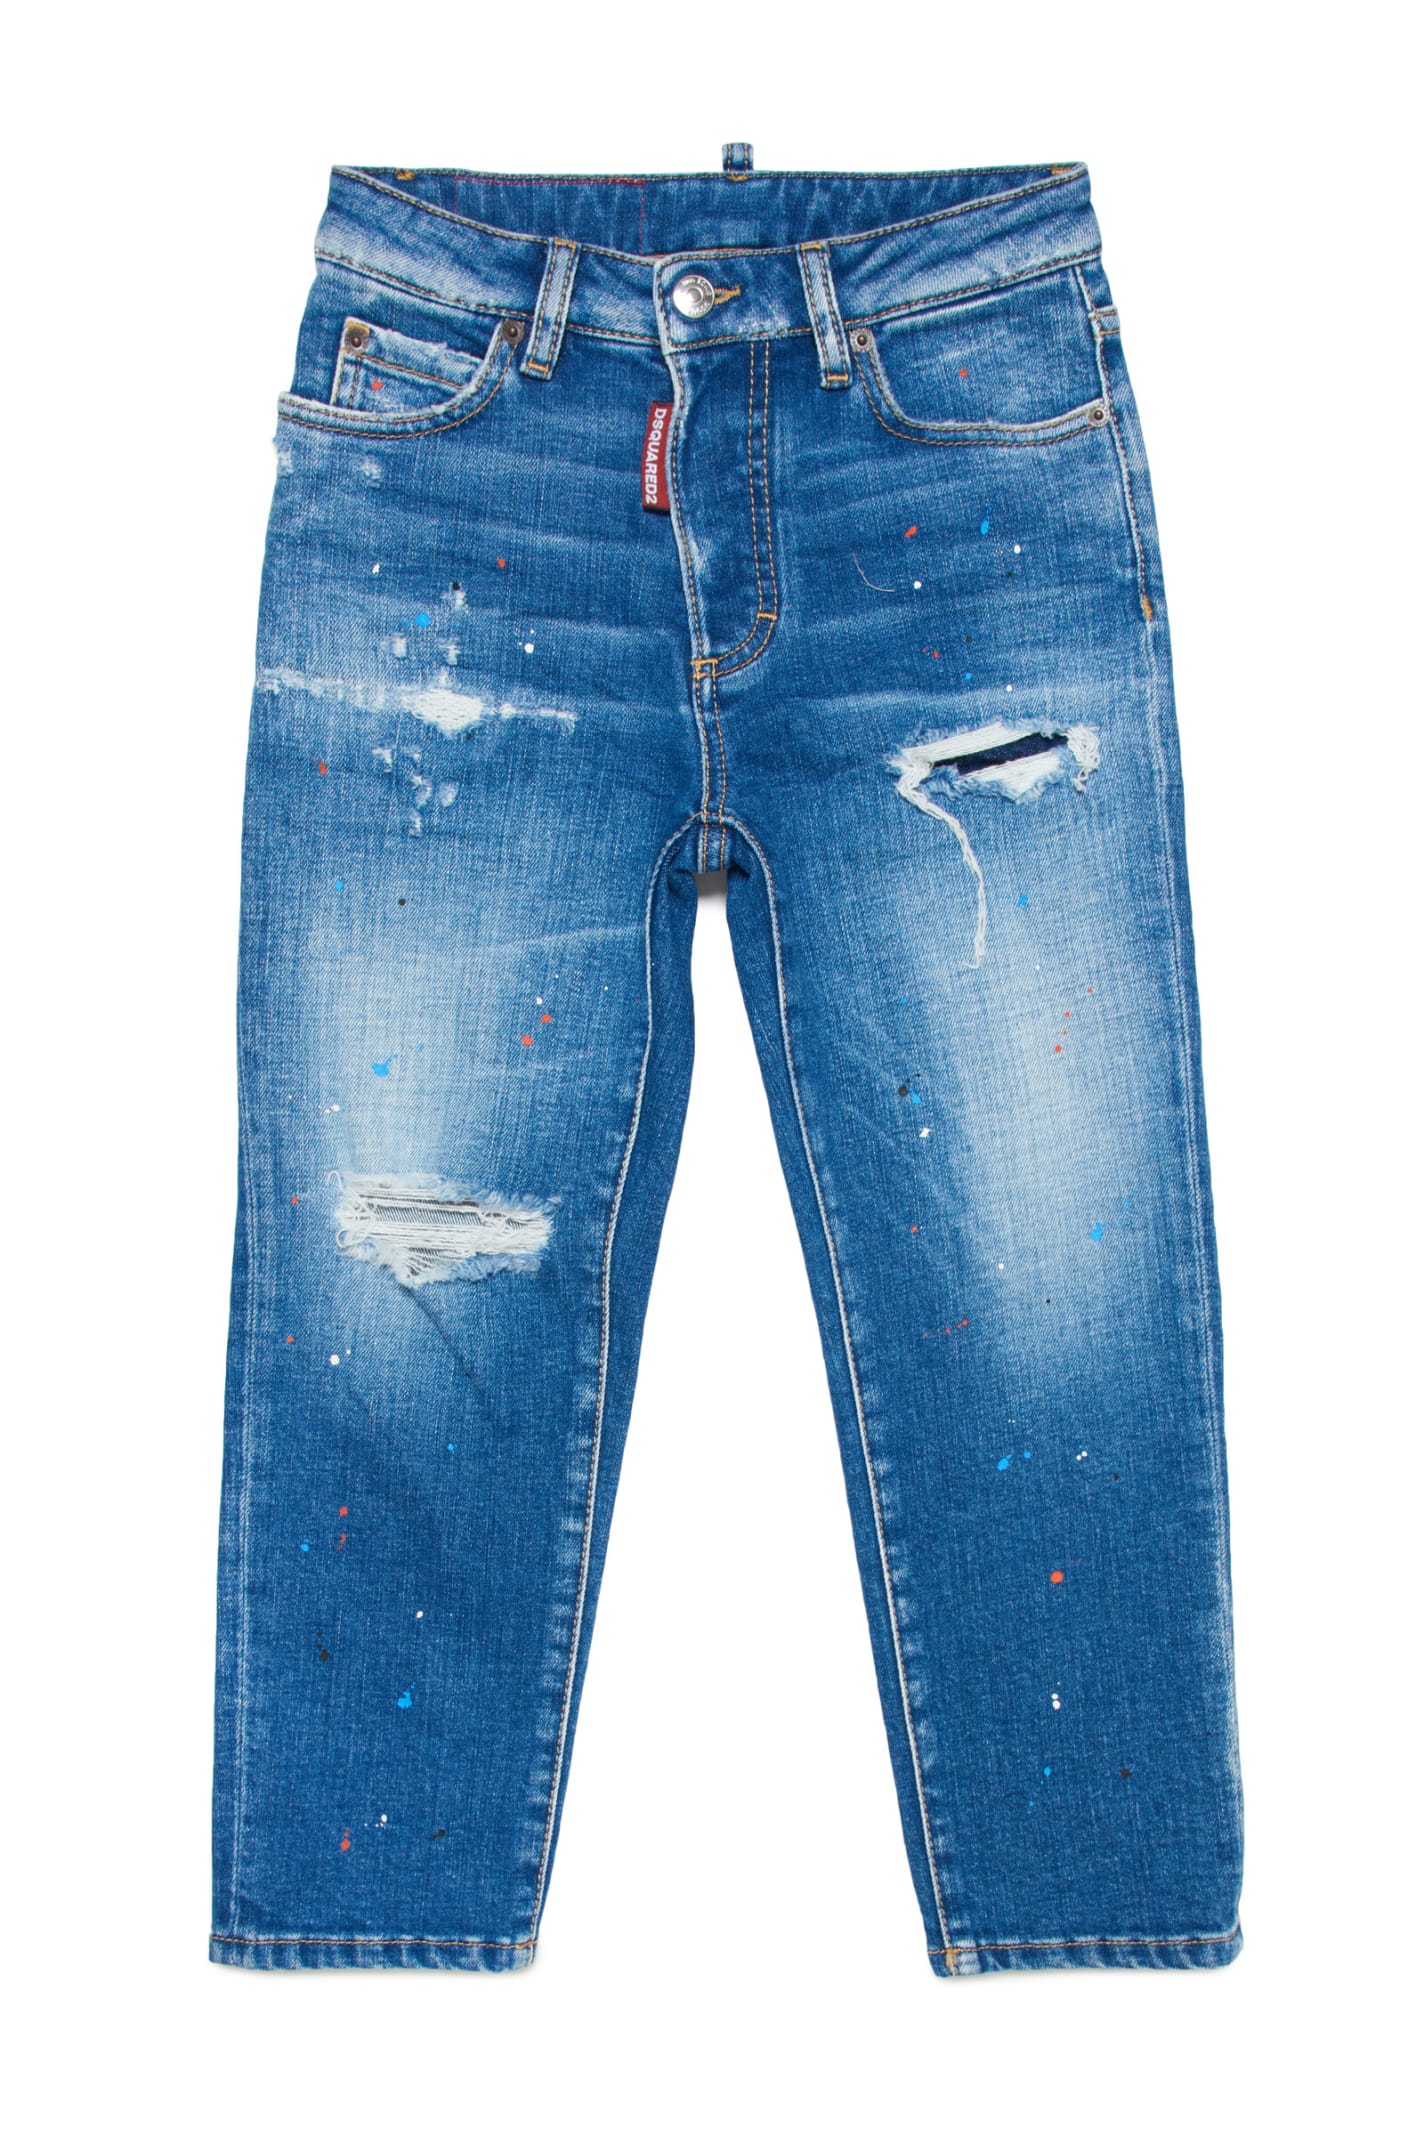 Dsquared2 D2p385f Boston Jean Trousers Dsquared Jeans Boston Boyfriend Washed Out With Tears And Stains